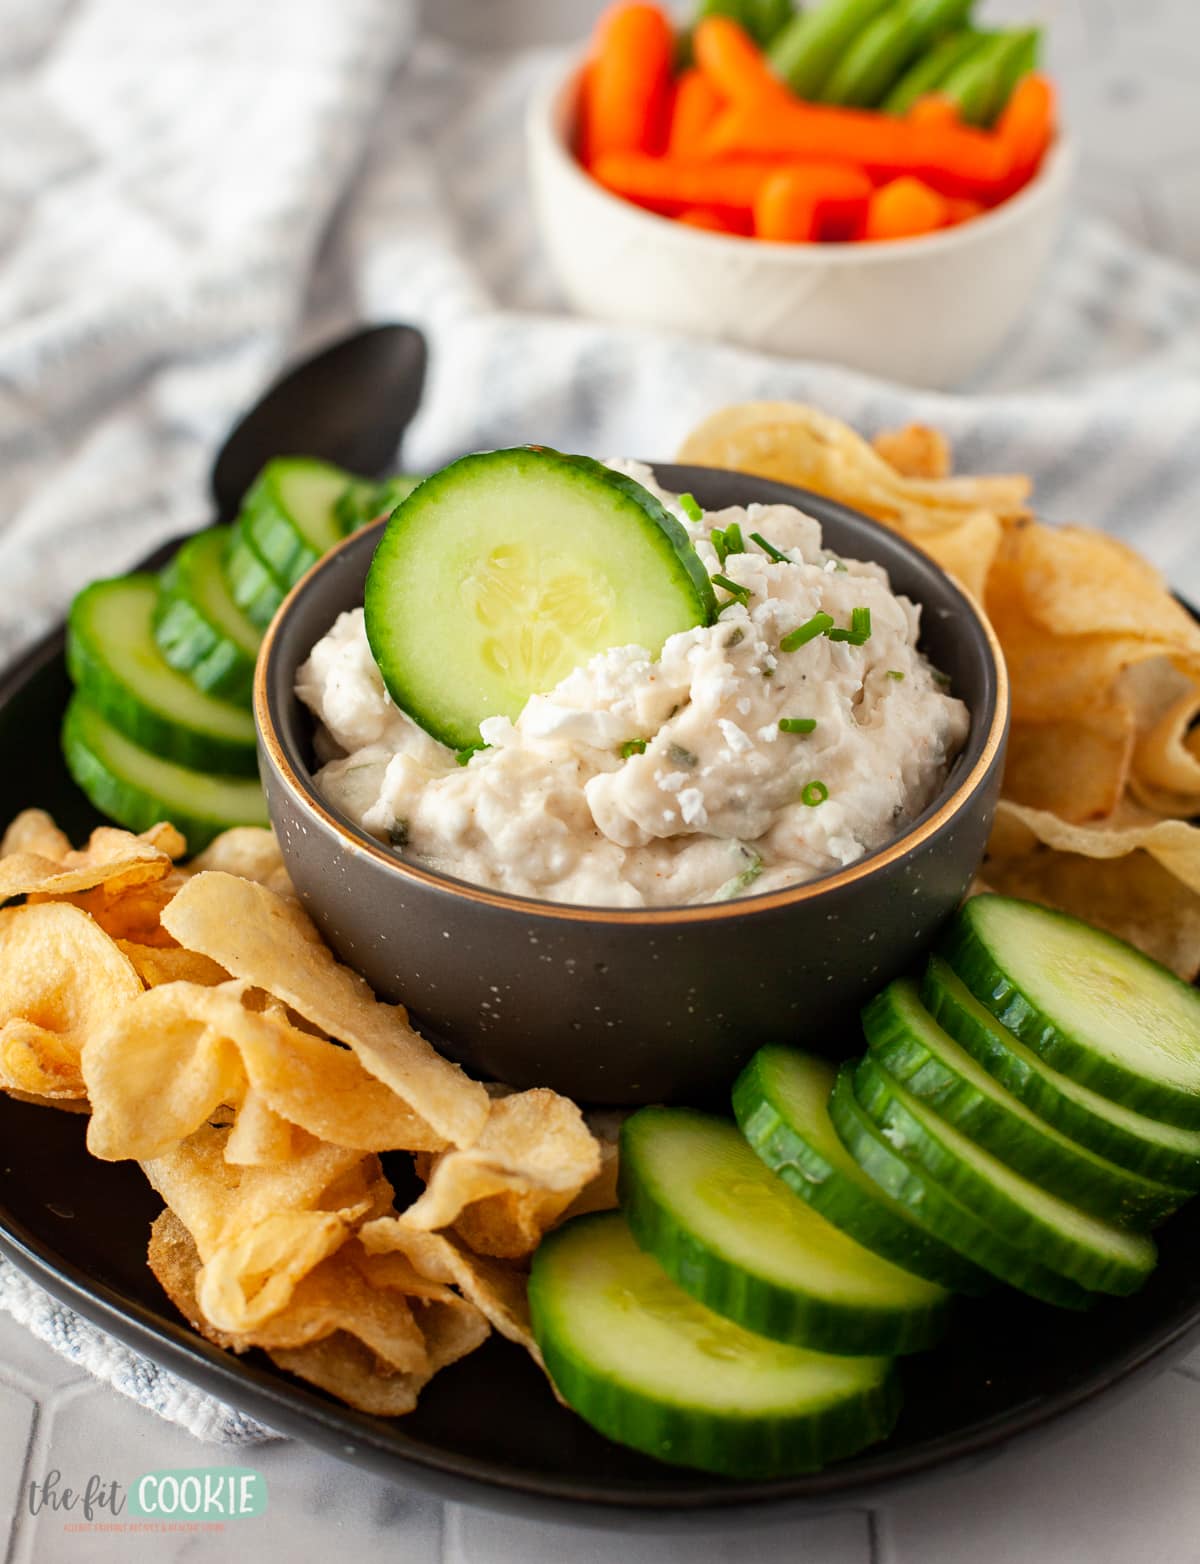 close up photo of feta dip with a slice of cucumber in it